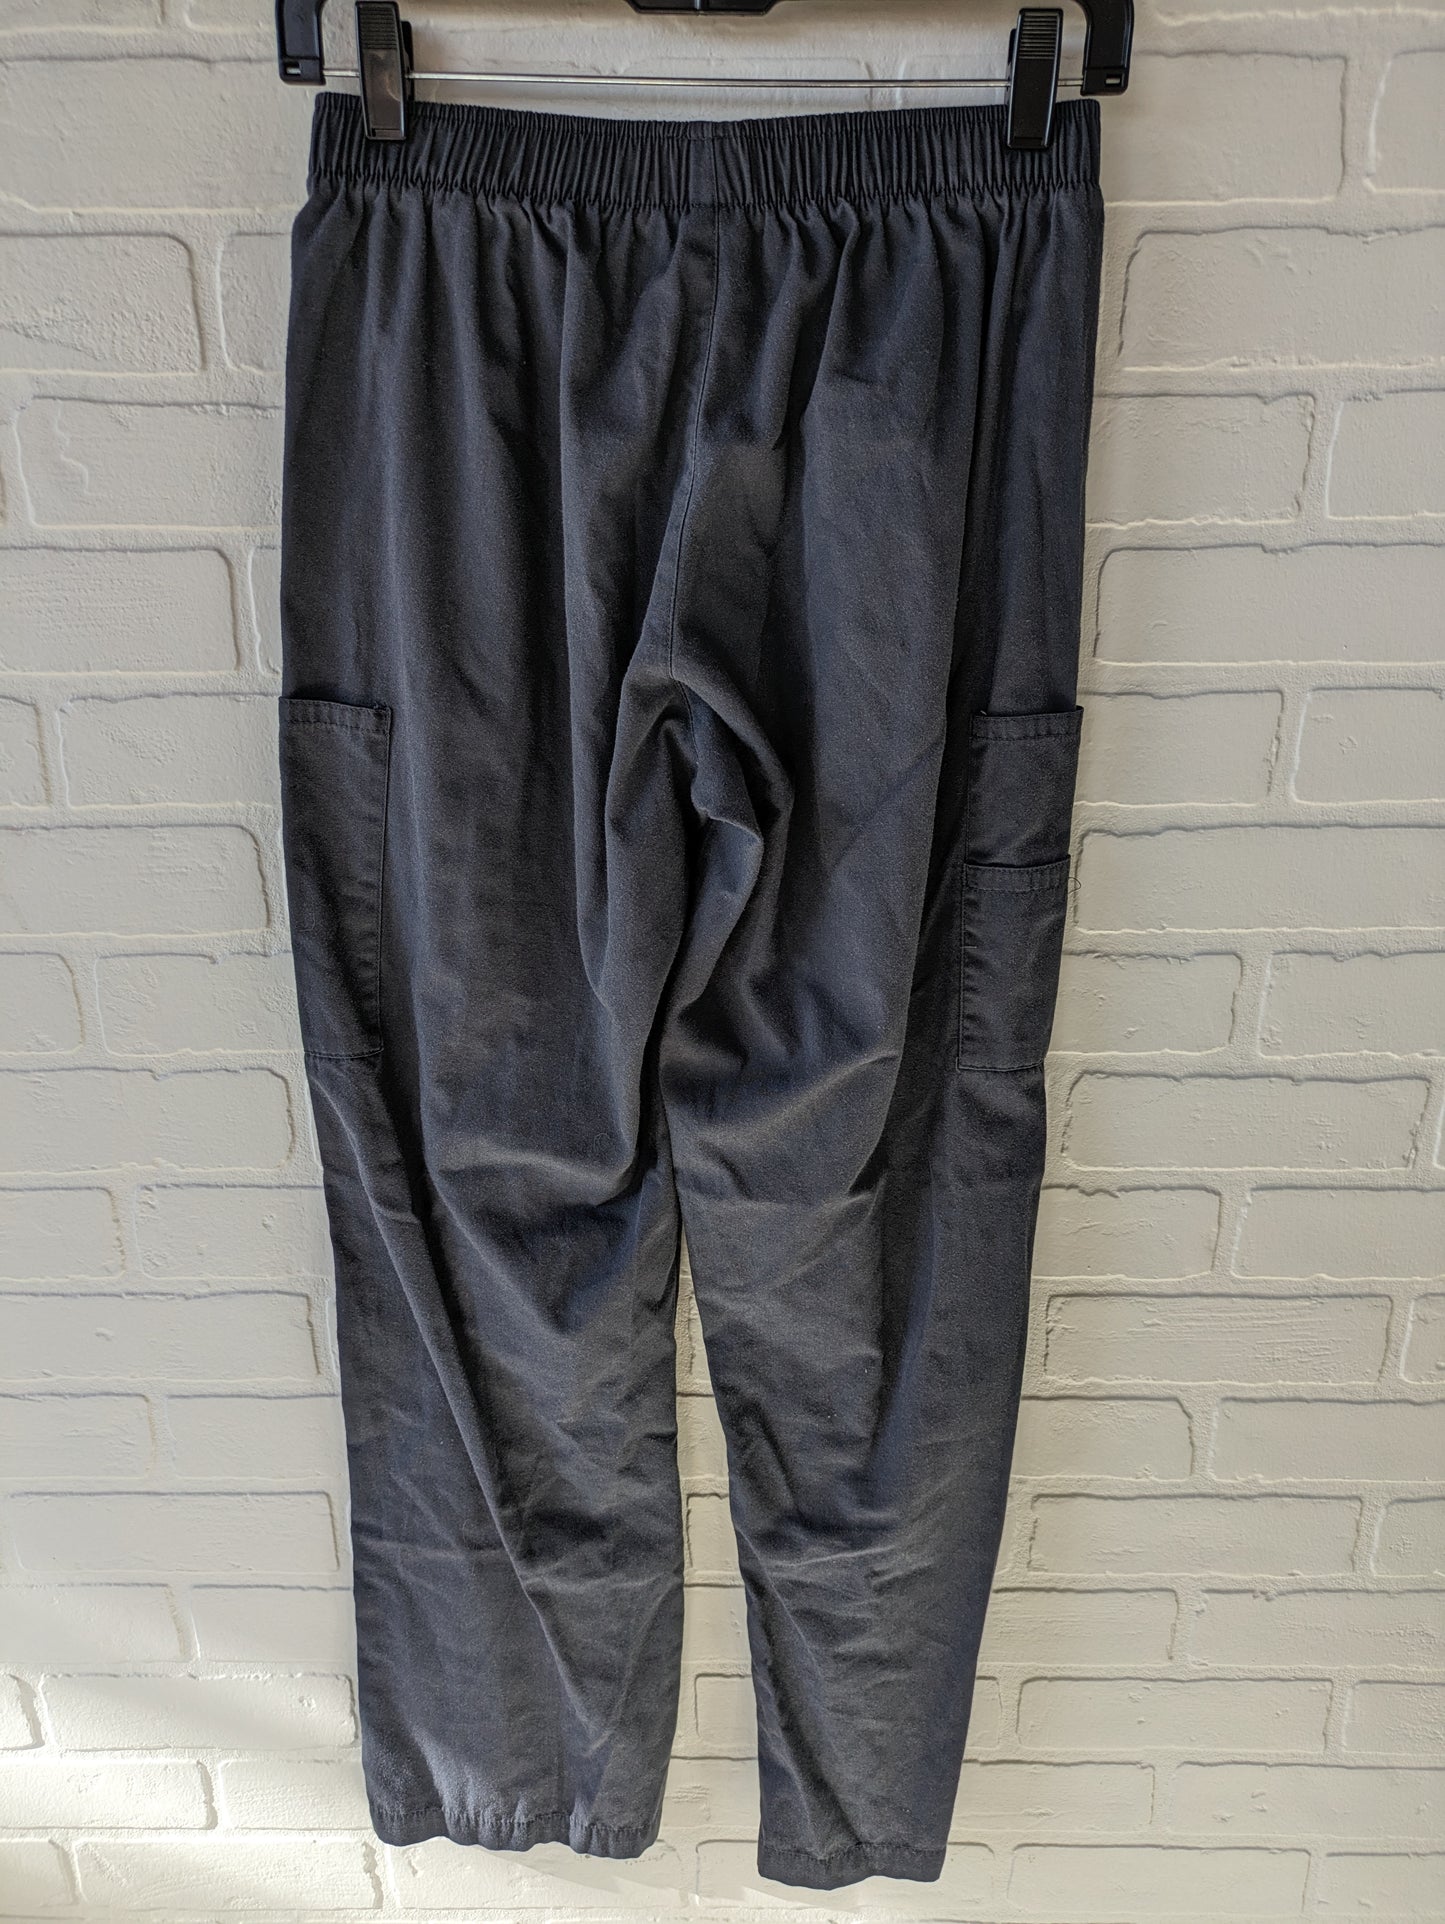 Pants Ankle By Clothes Mentor  Size: 4